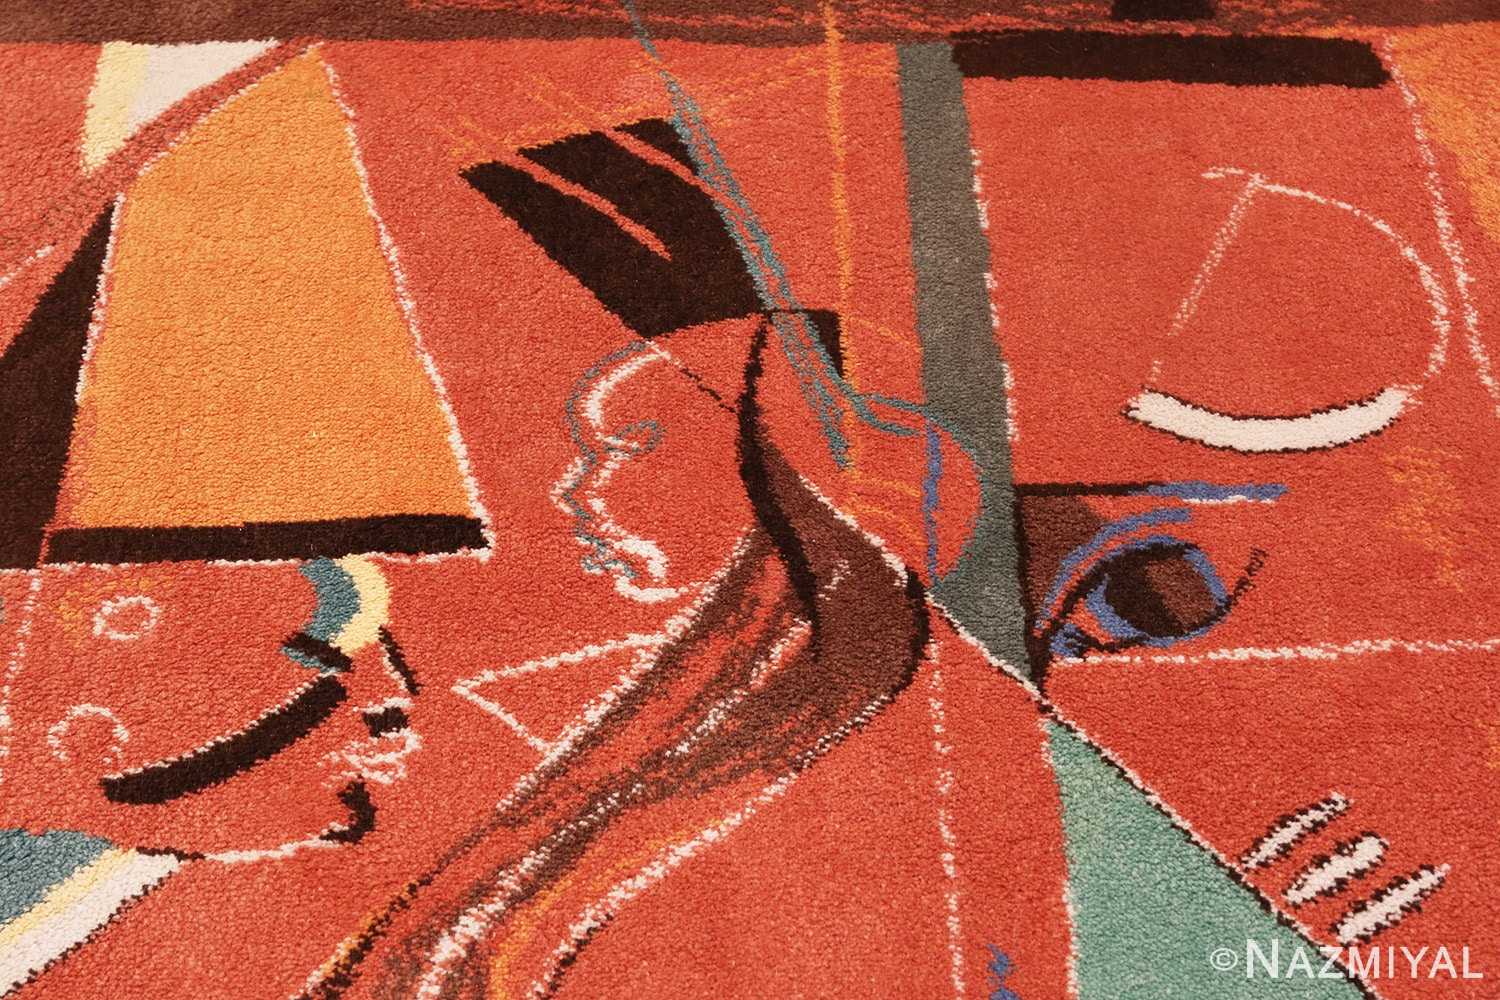 Picture of the center of the Image of the weave of the Vintage Miles Davis Jazz Scene Art Rug 70066